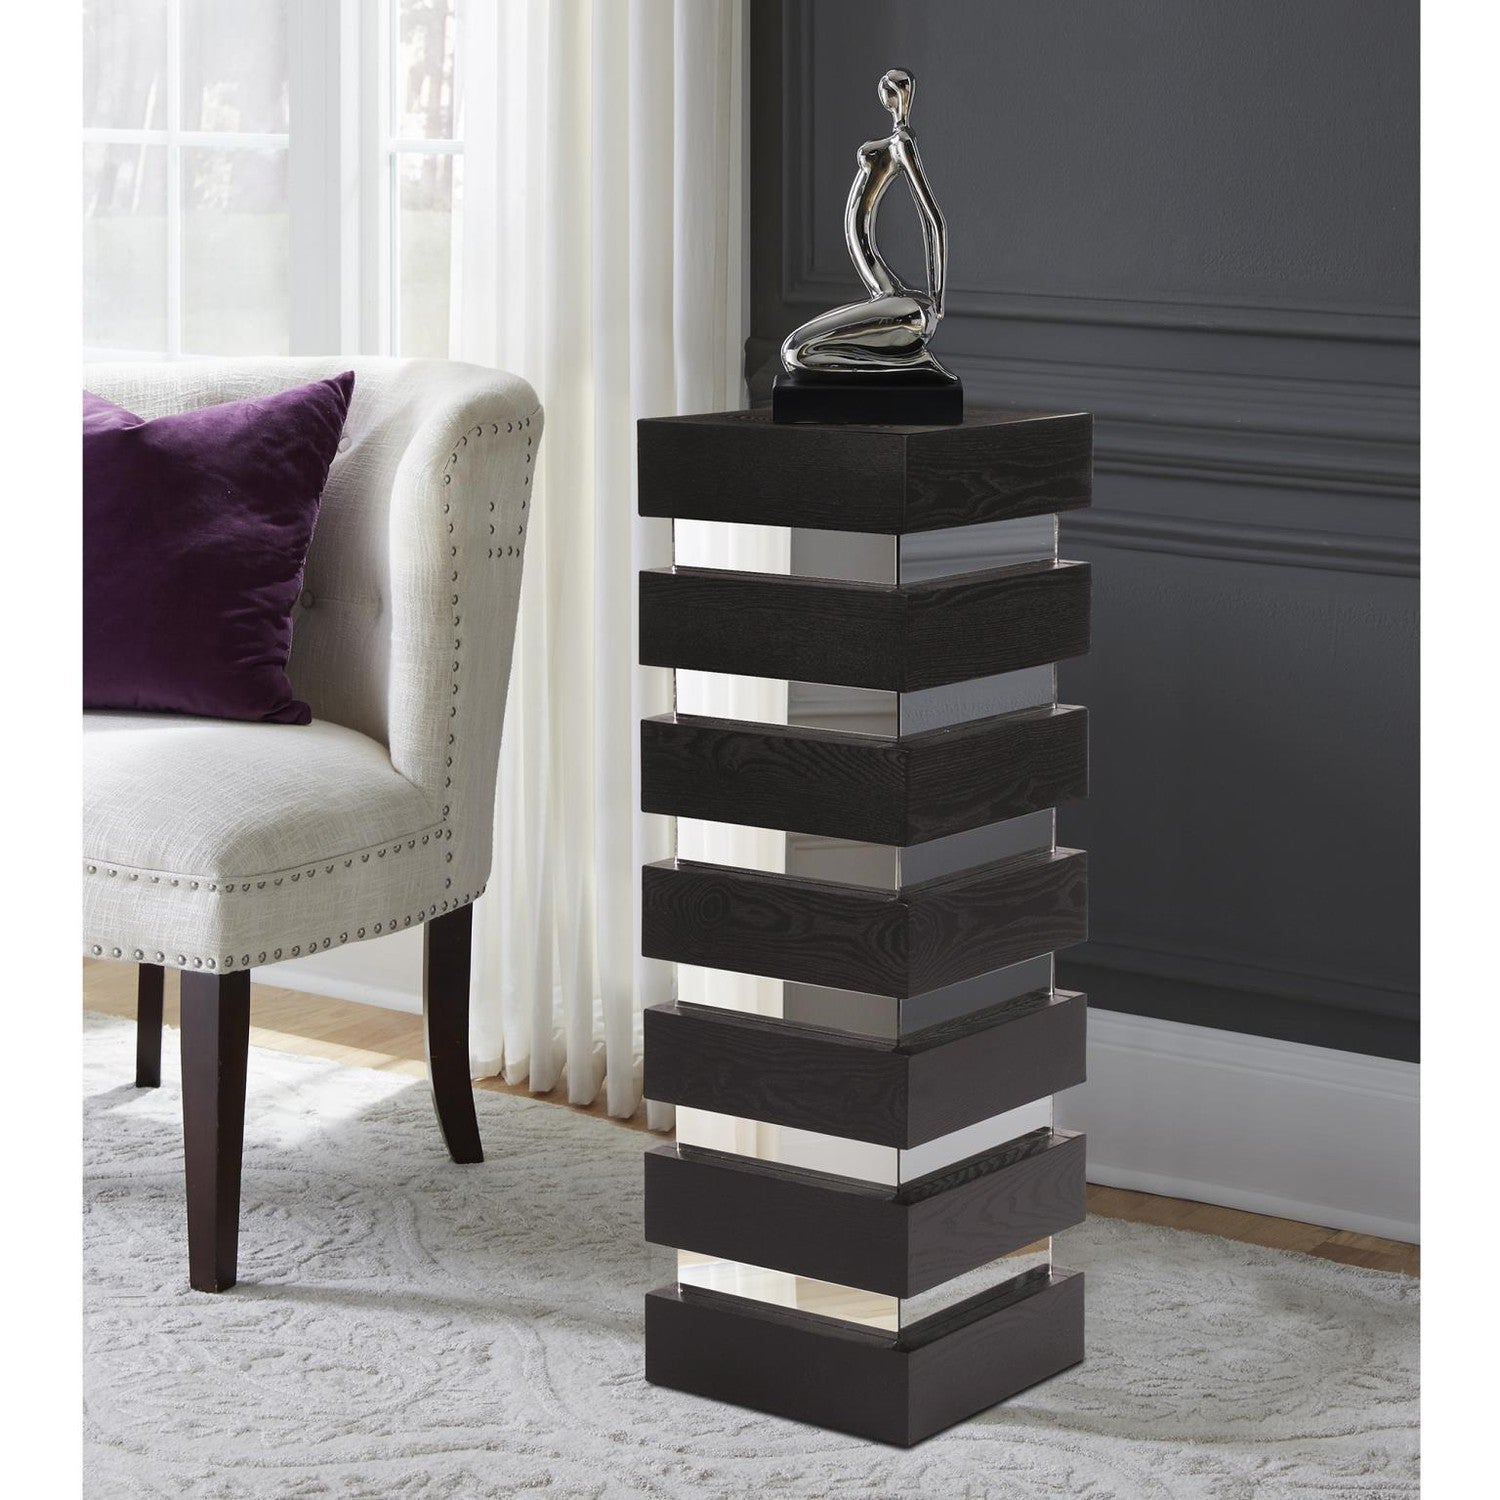 Stepped Black Wood Veneer Pedestal with Mirror - Tall-The Howard Elliott Collection-HOWARD-37125-Decor-2-France and Son